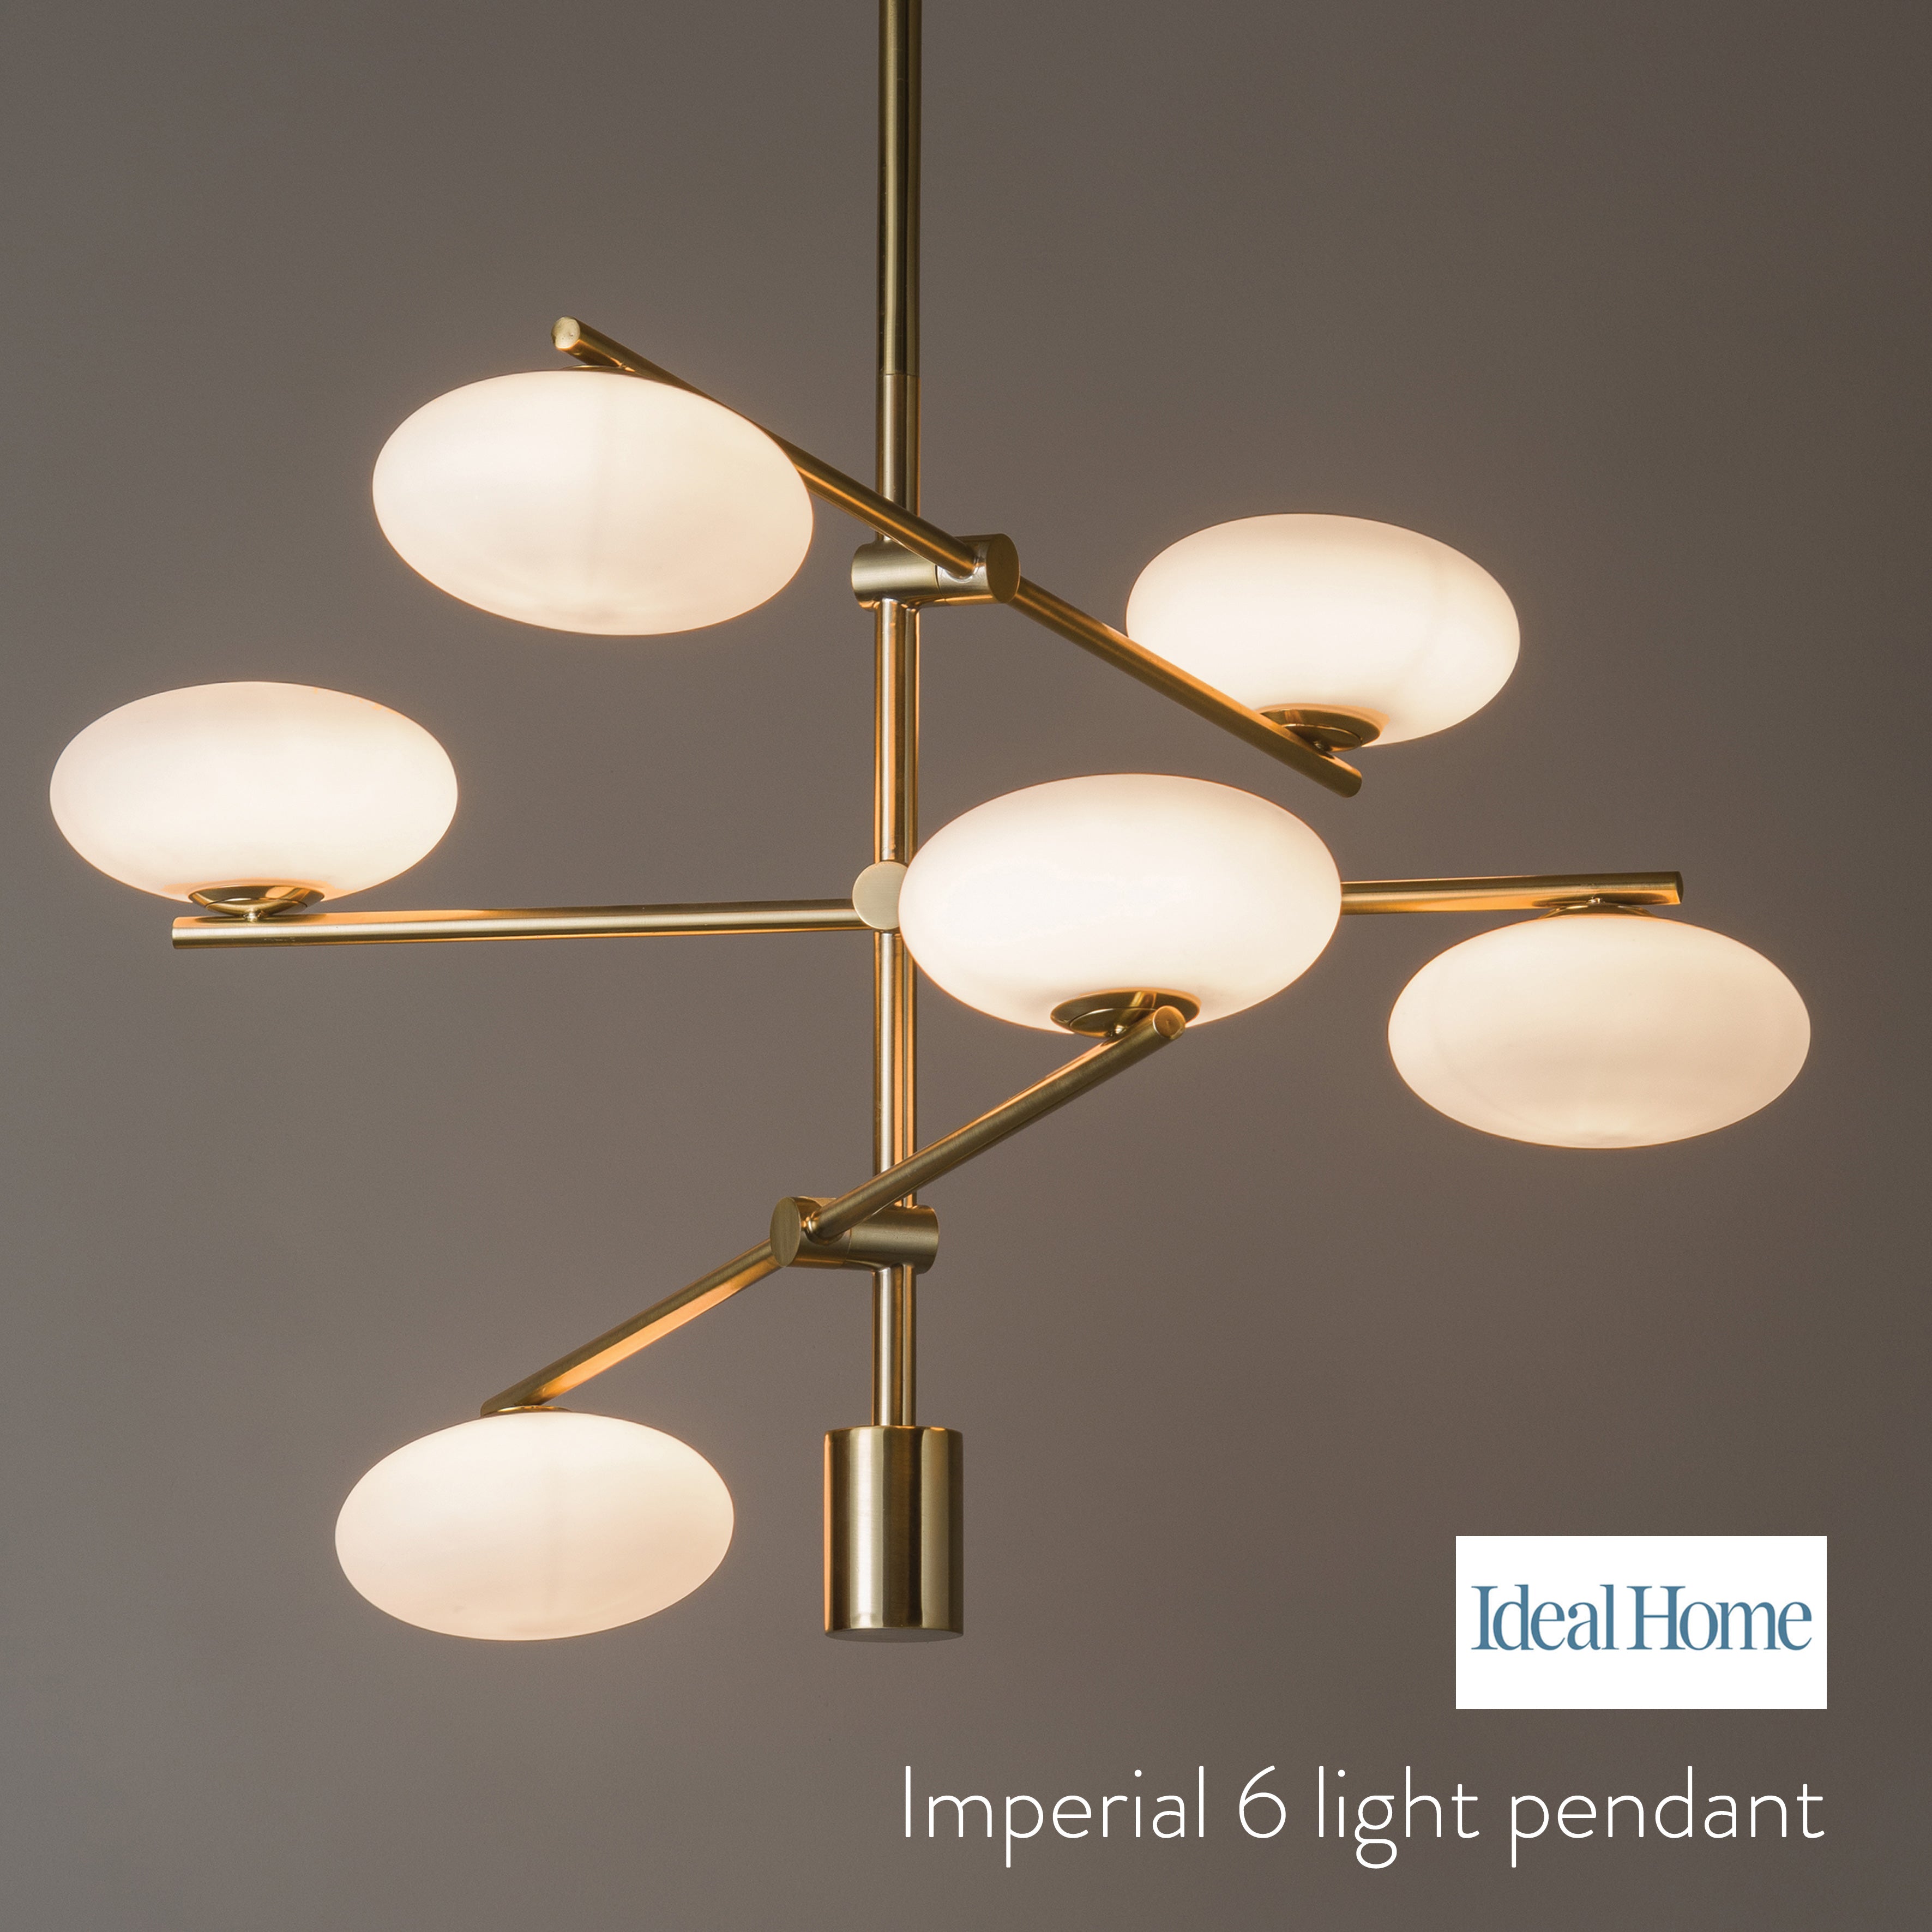 Lights to love - Ideal Home